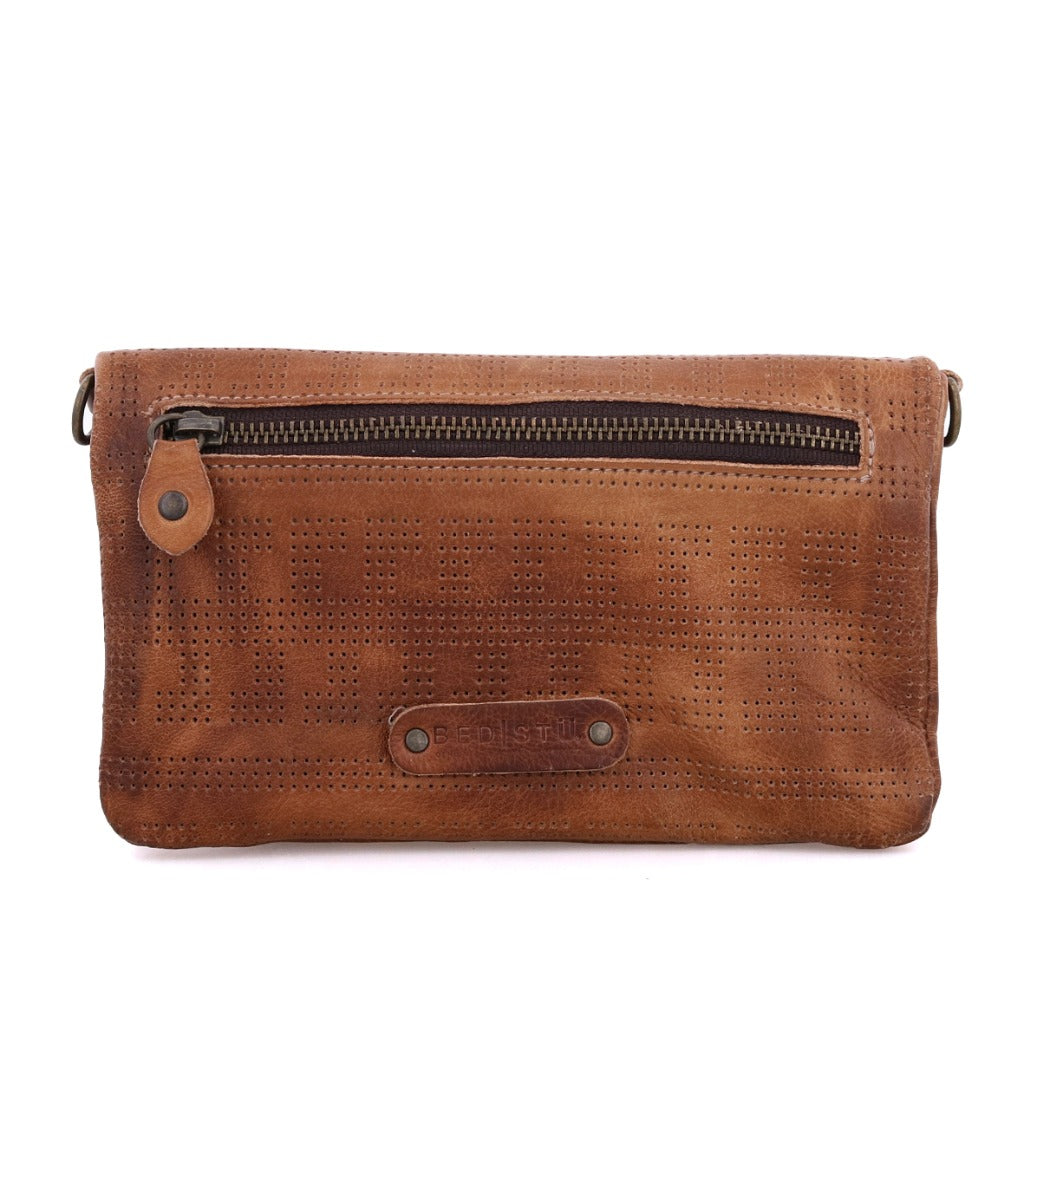 A Bayshore leather clutch bag by Bed Stu with a zipper.